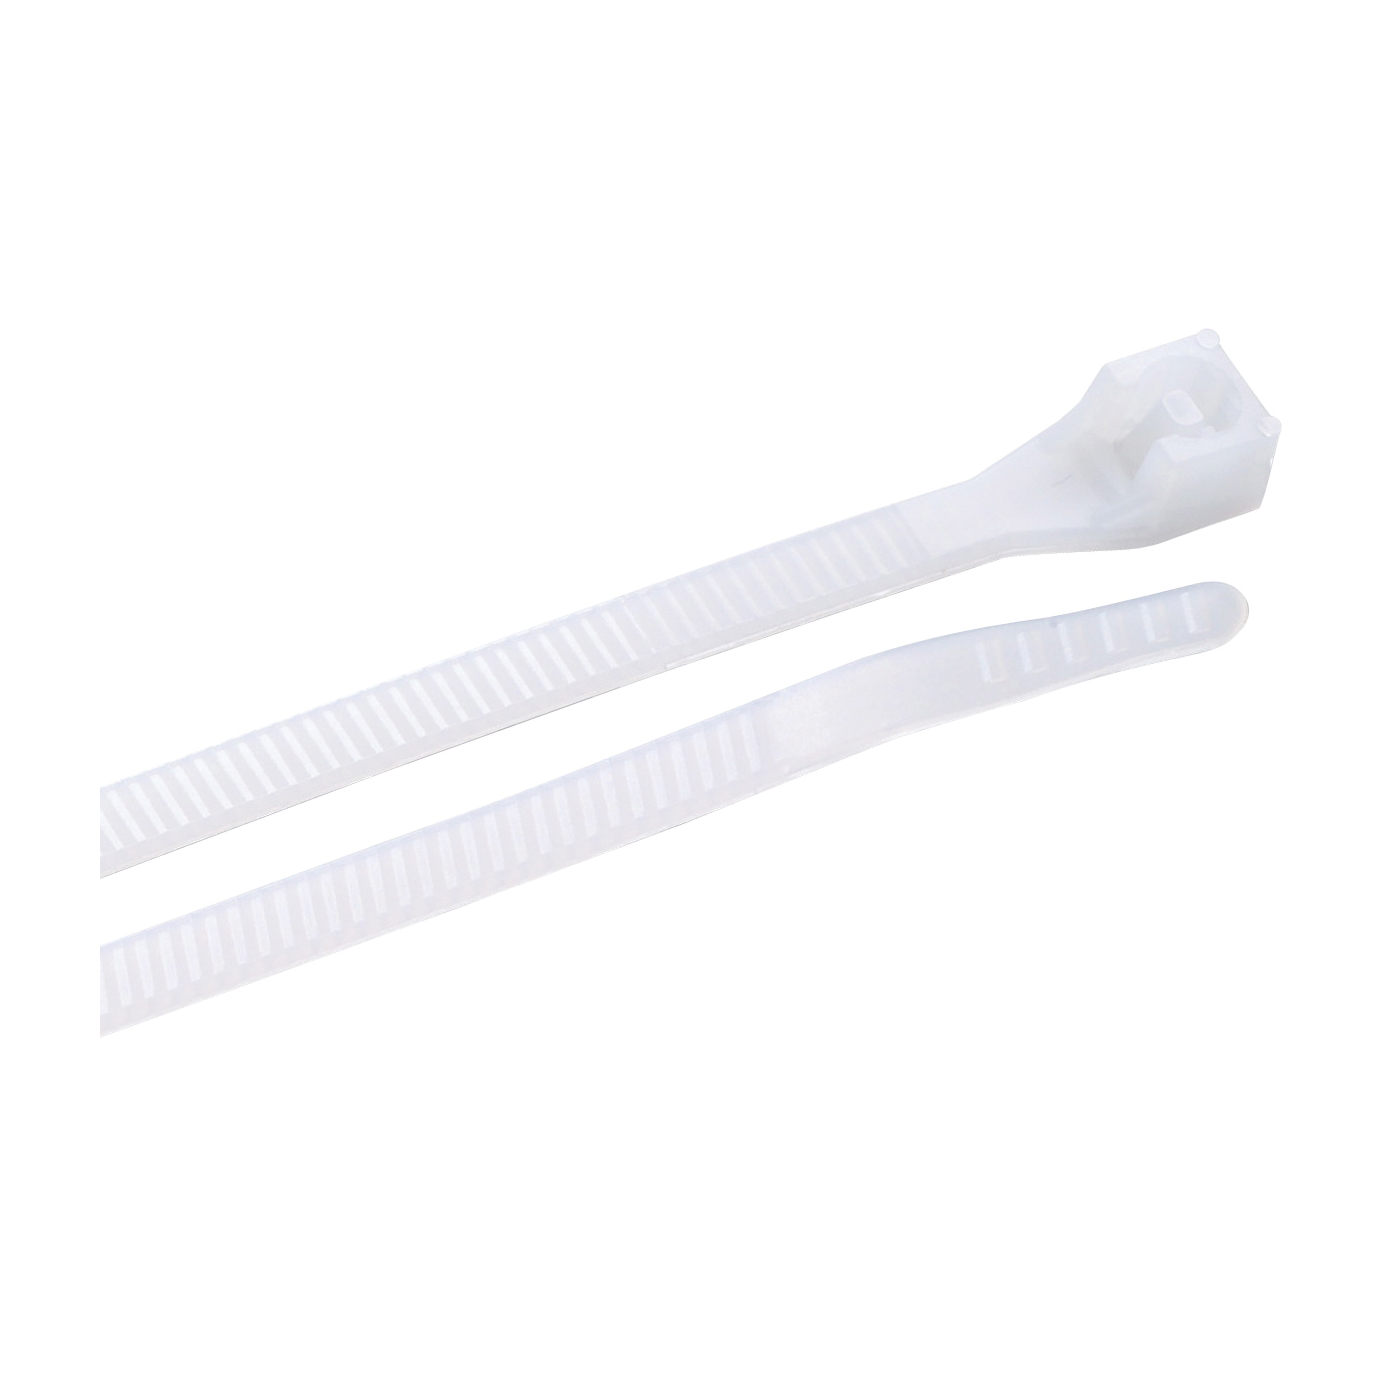 46-308 Cable Tie, Double-Lock Locking, 6/6 Nylon, Natural